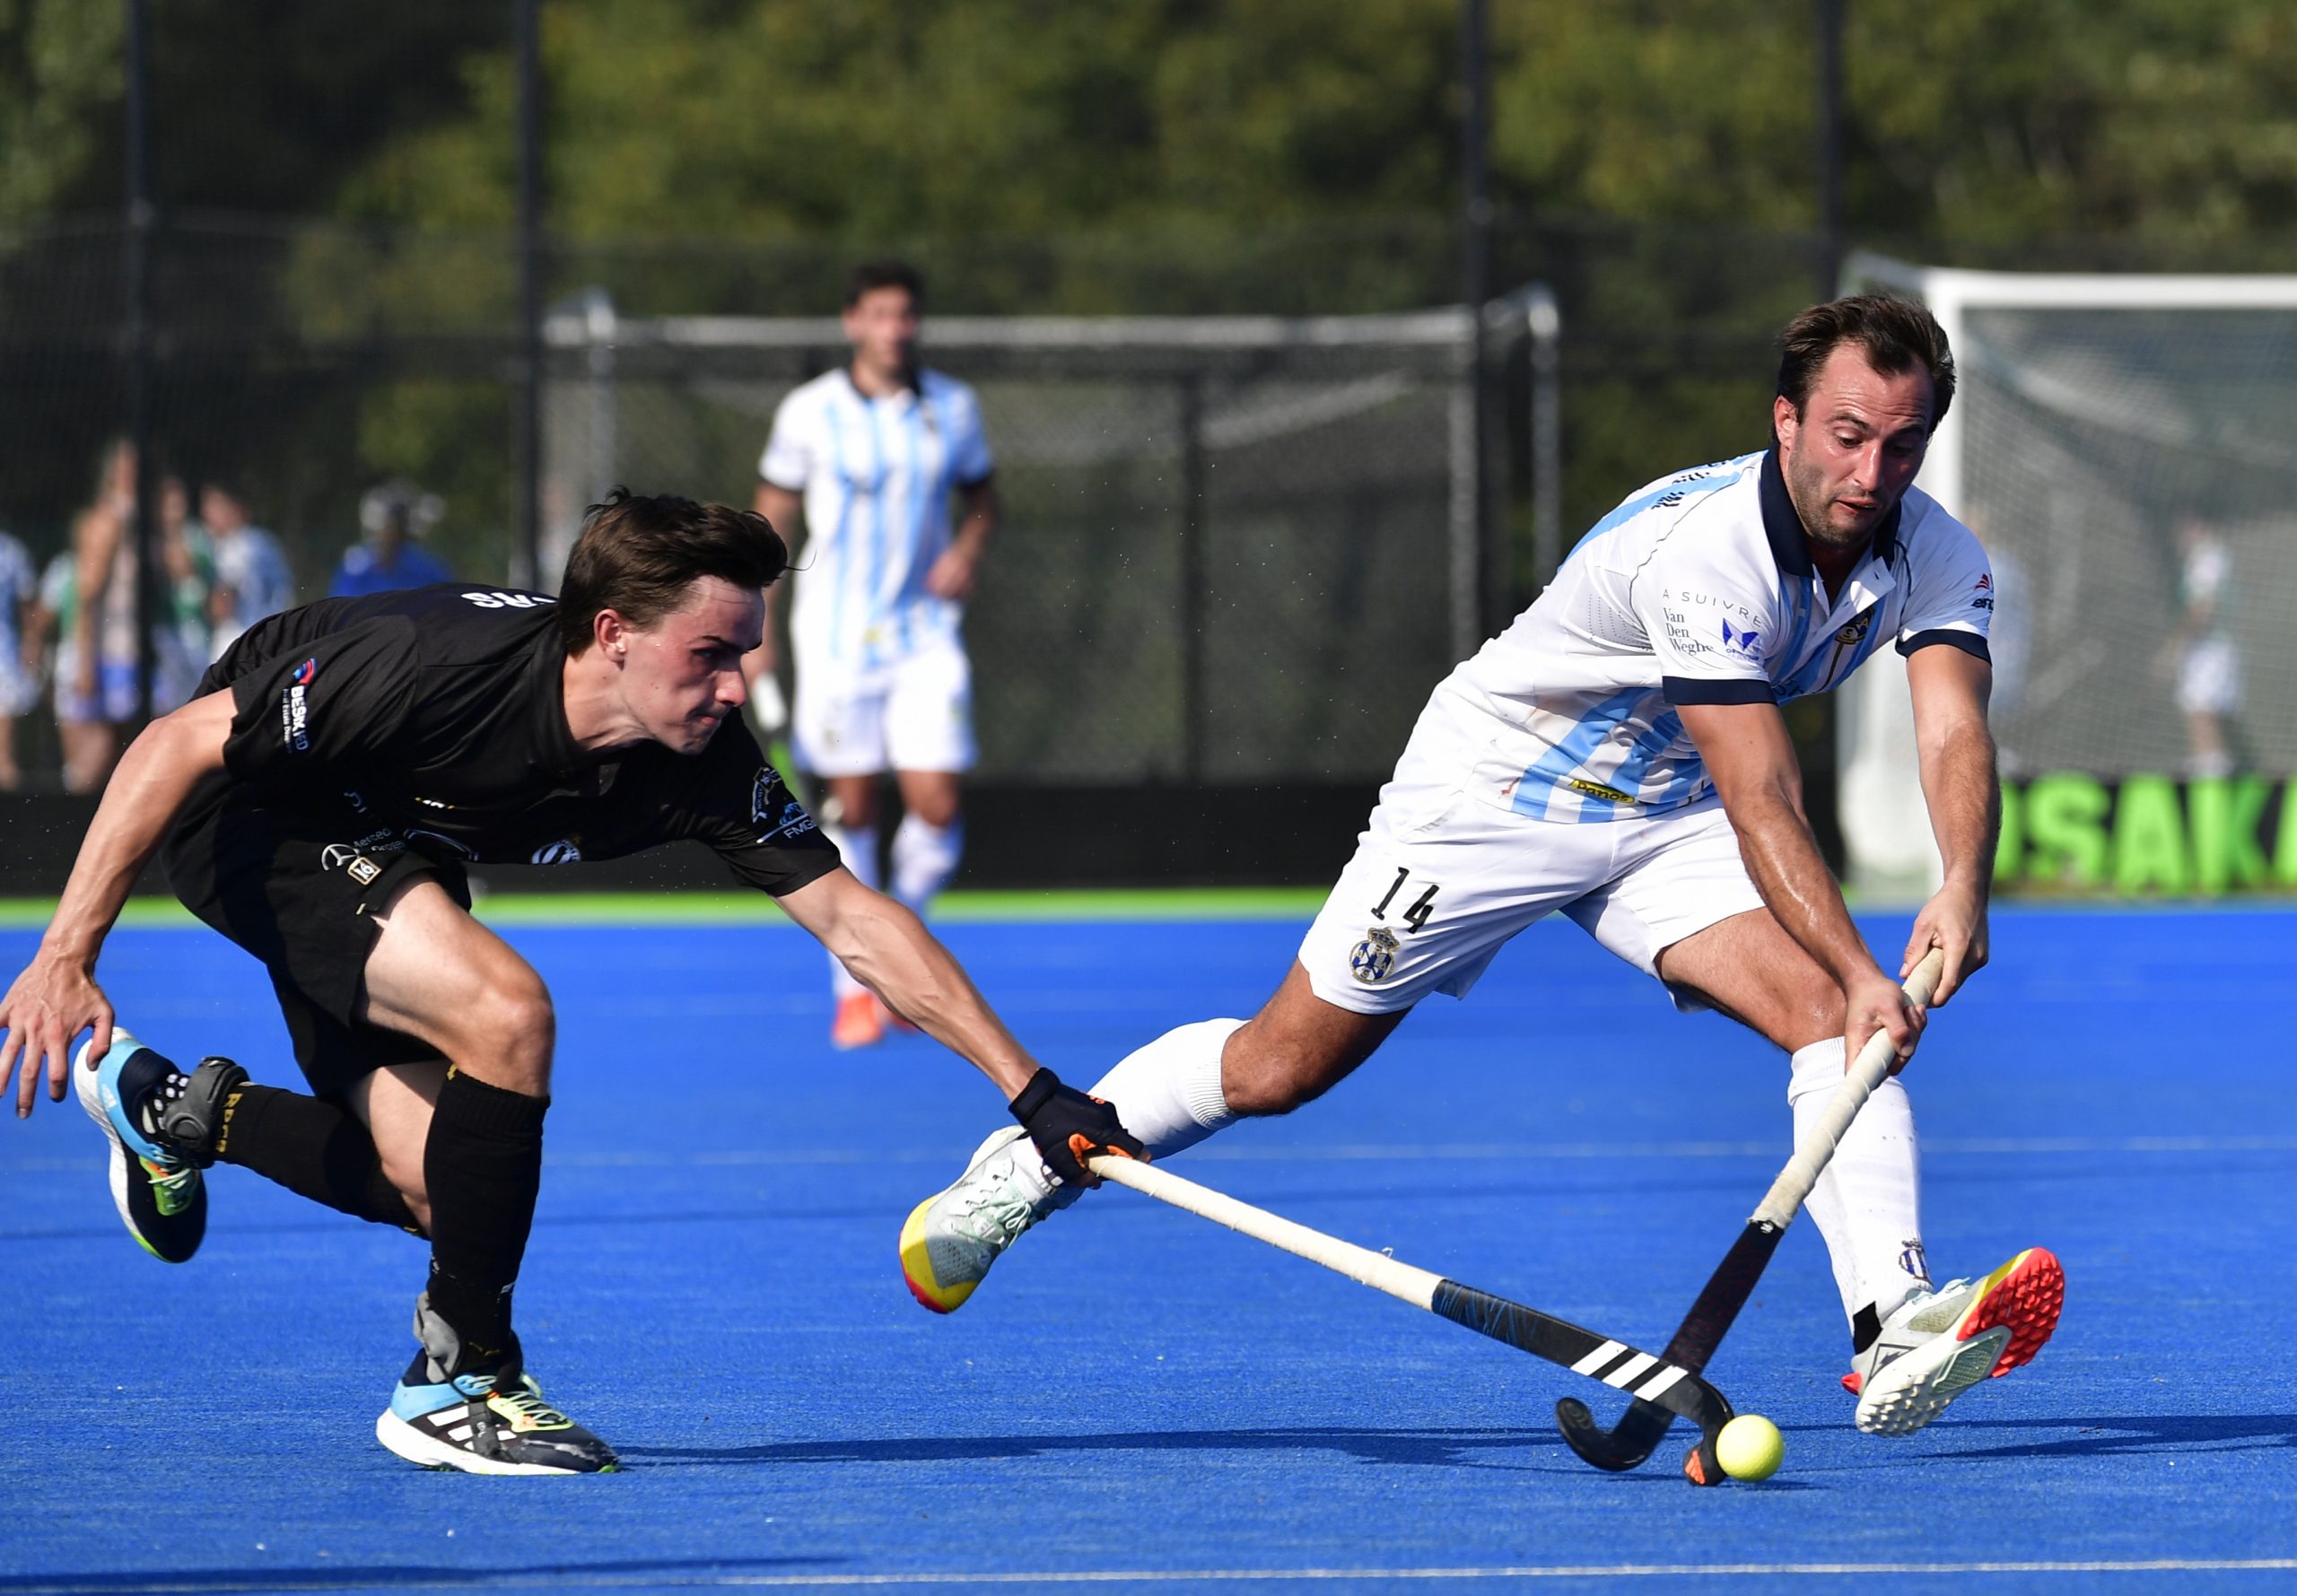 belgaimage 168252075 full scaled - Hockey returns as La Gantoise go top - La Gantoise moved back to the top of the Belgian men’s Honor Division following the competition’s return to action on Sunday following a Covid-related cessation.